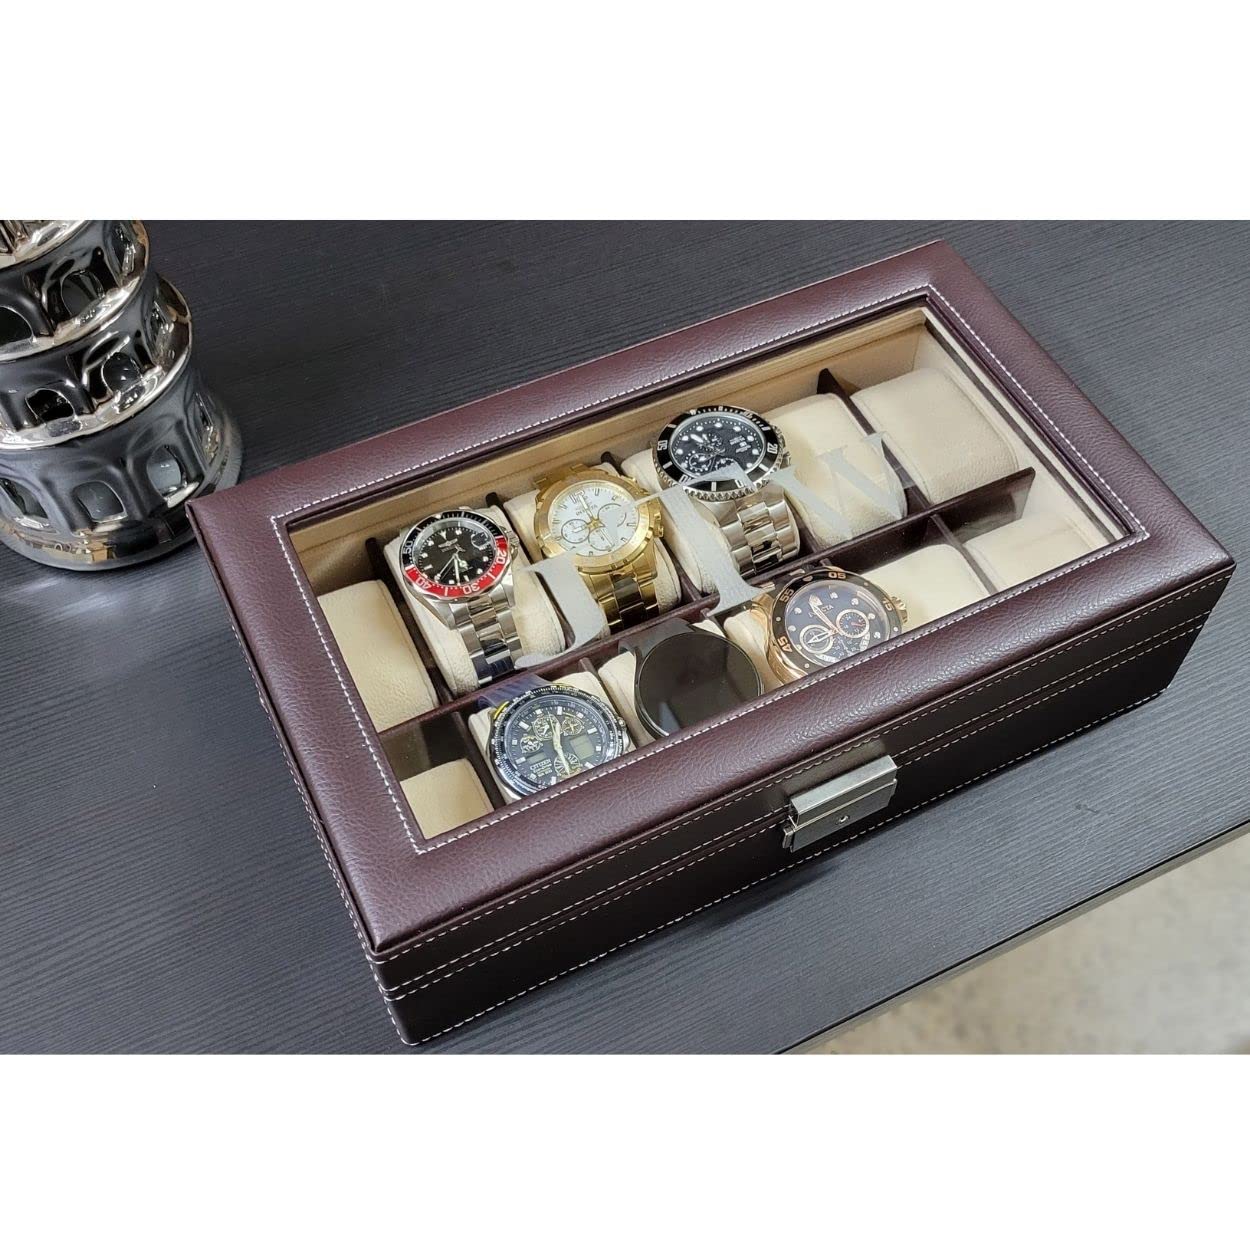 TIMELYBUYS Personalized 12 Slot Chocolate Brown Leatherette Men's Watch Box Display Case Collection Jewelry Box Storage Engraved Glass Top